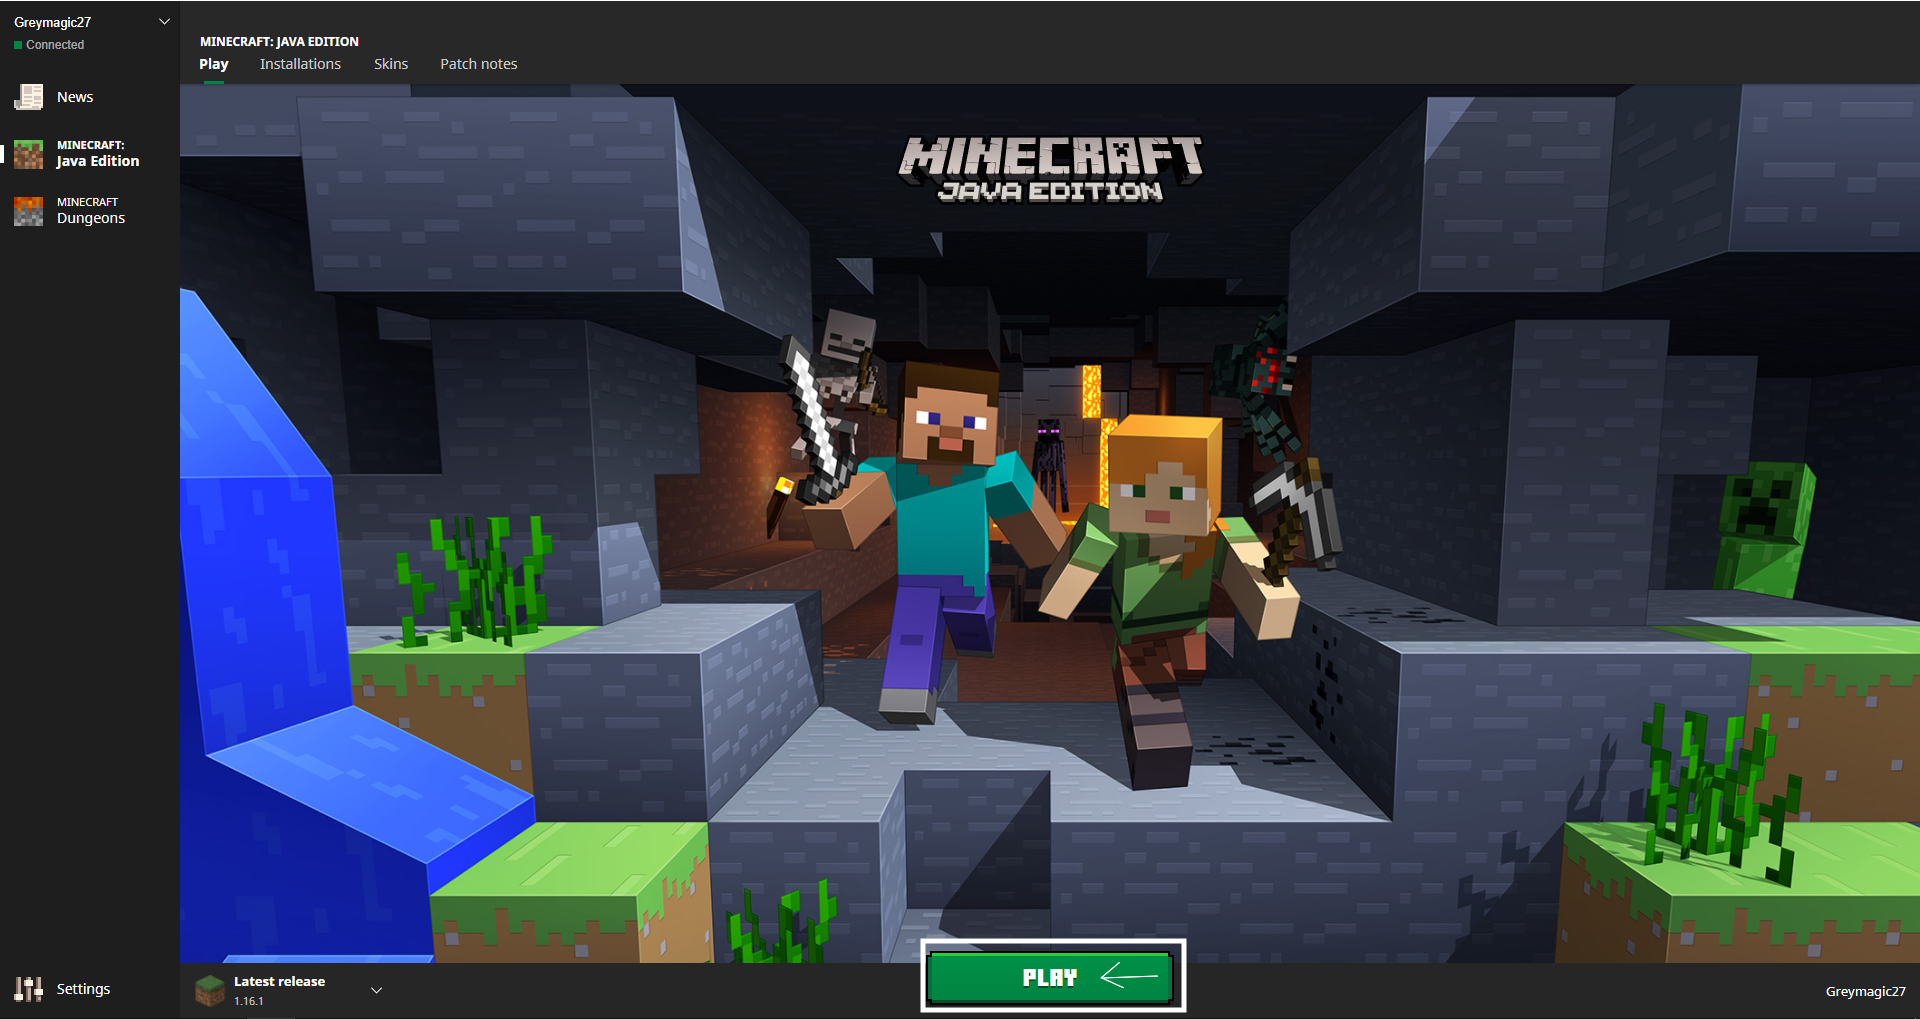 Minecraft launcher showing Play button